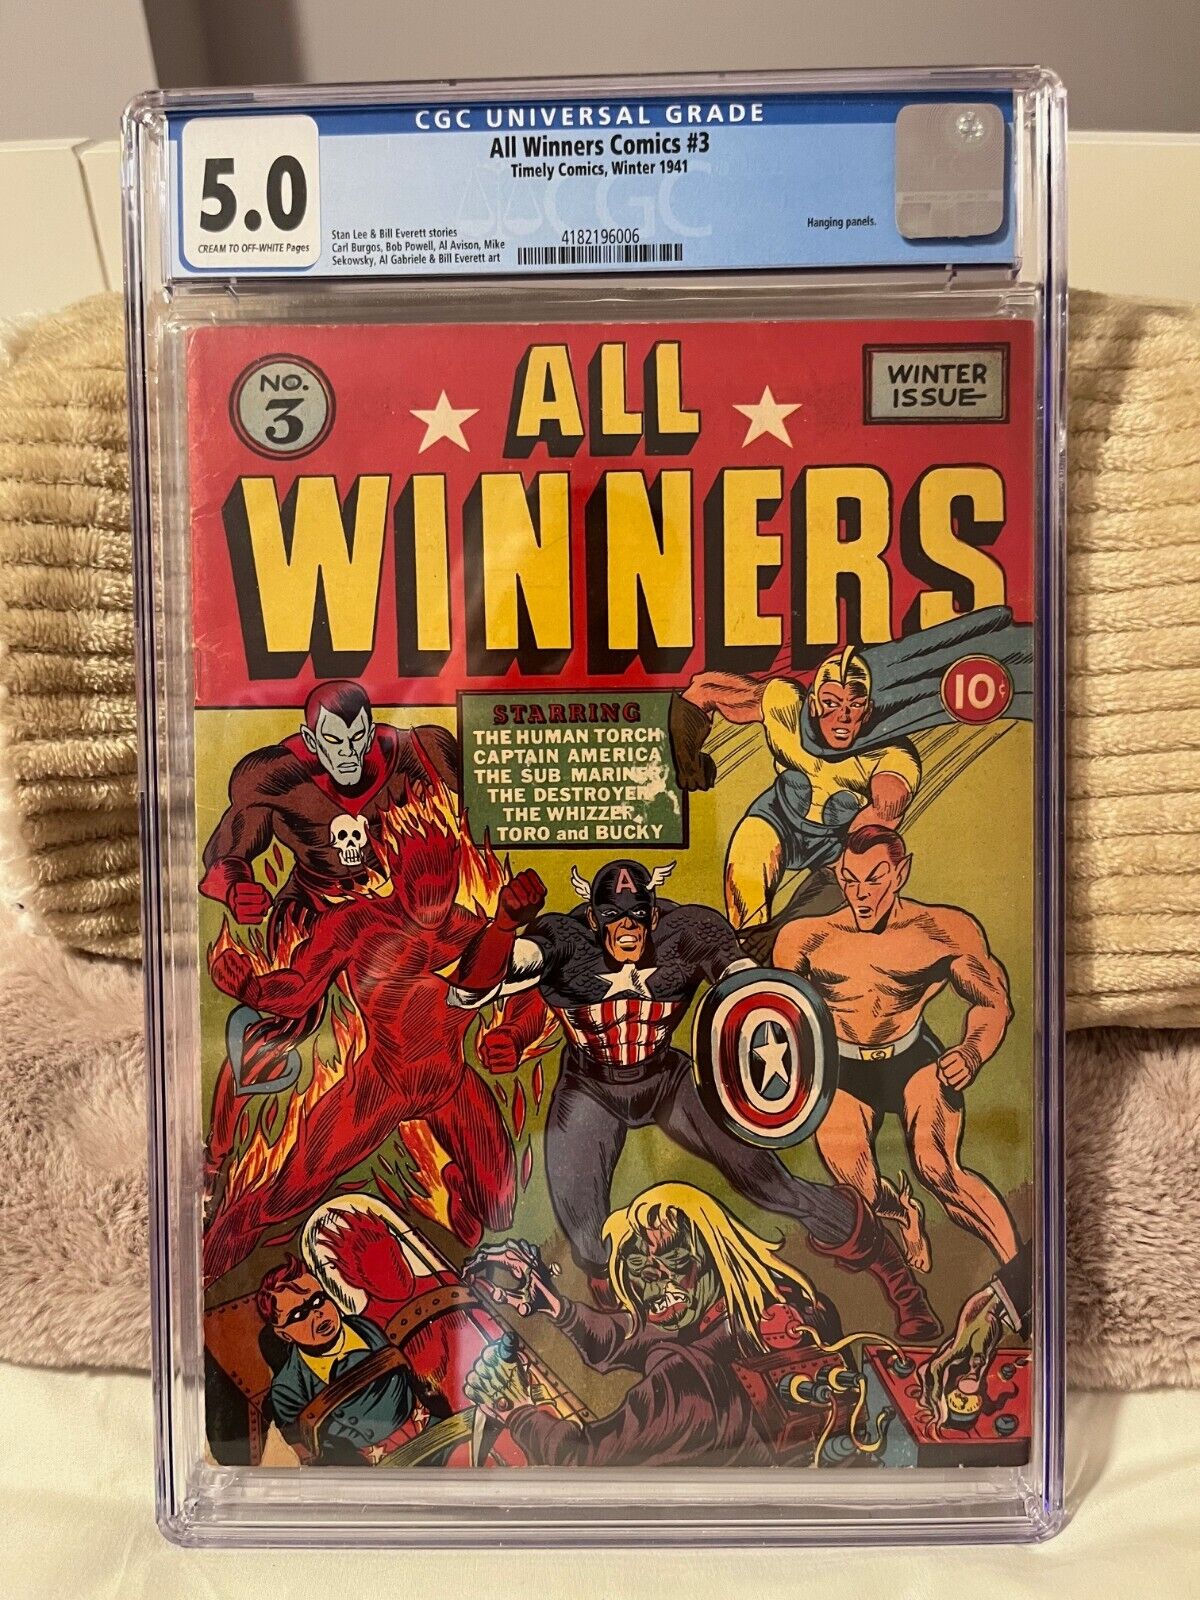 ALL WINNERS COMICS #3 (Timely Winter 1941) CGC 5.0 Alex Schomburg Cover